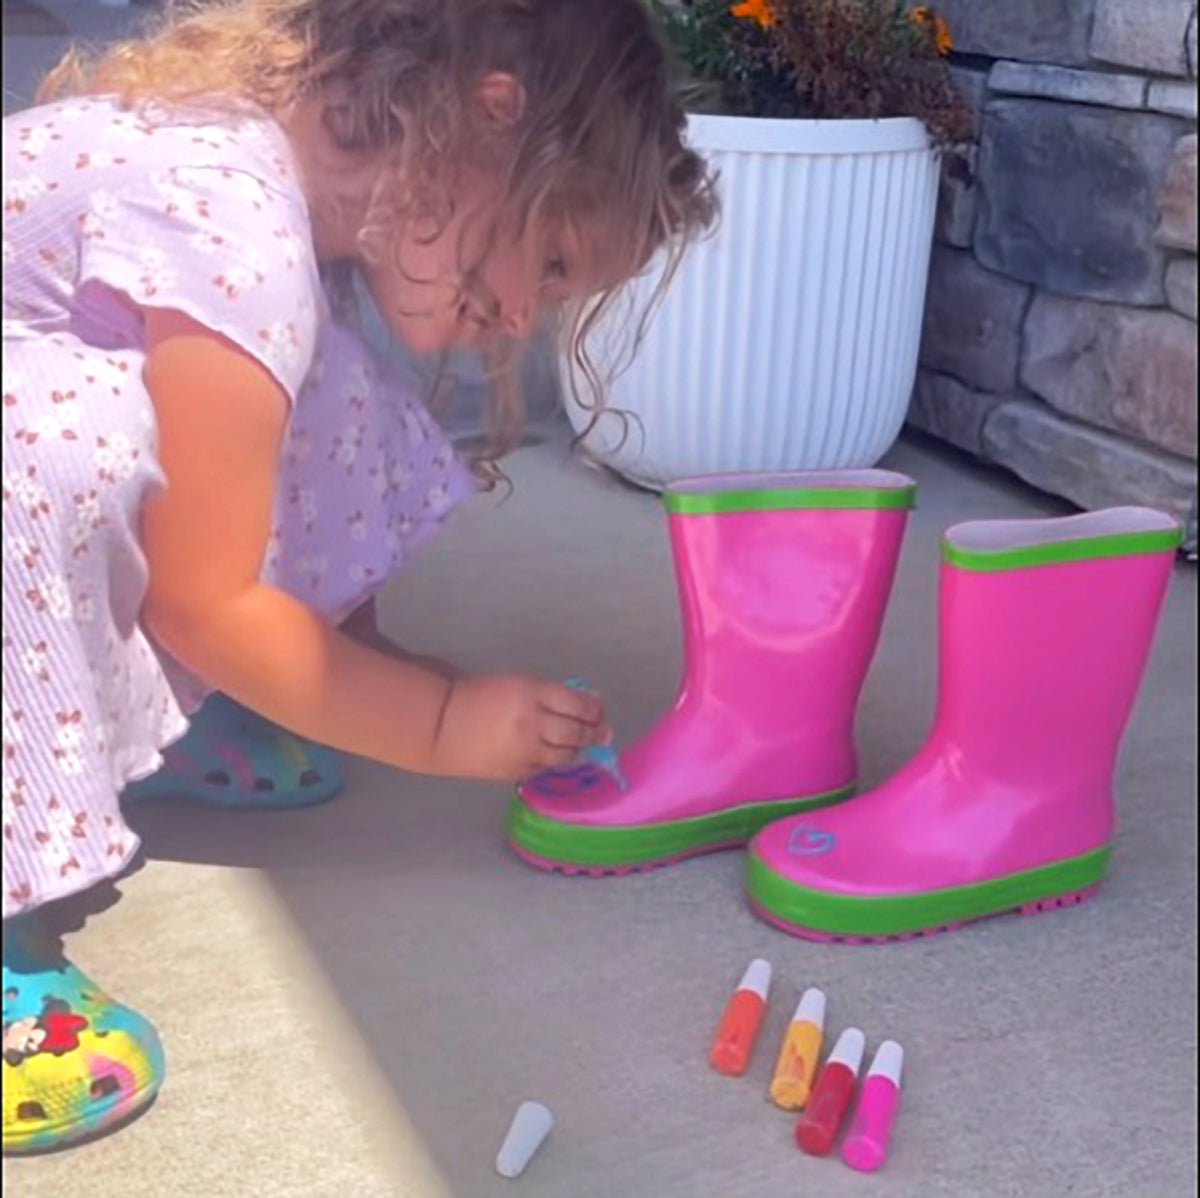 Little Pals Paint Your Own Wellies Rain Boots, Pink with Green Trim, Kids US Size 9.5